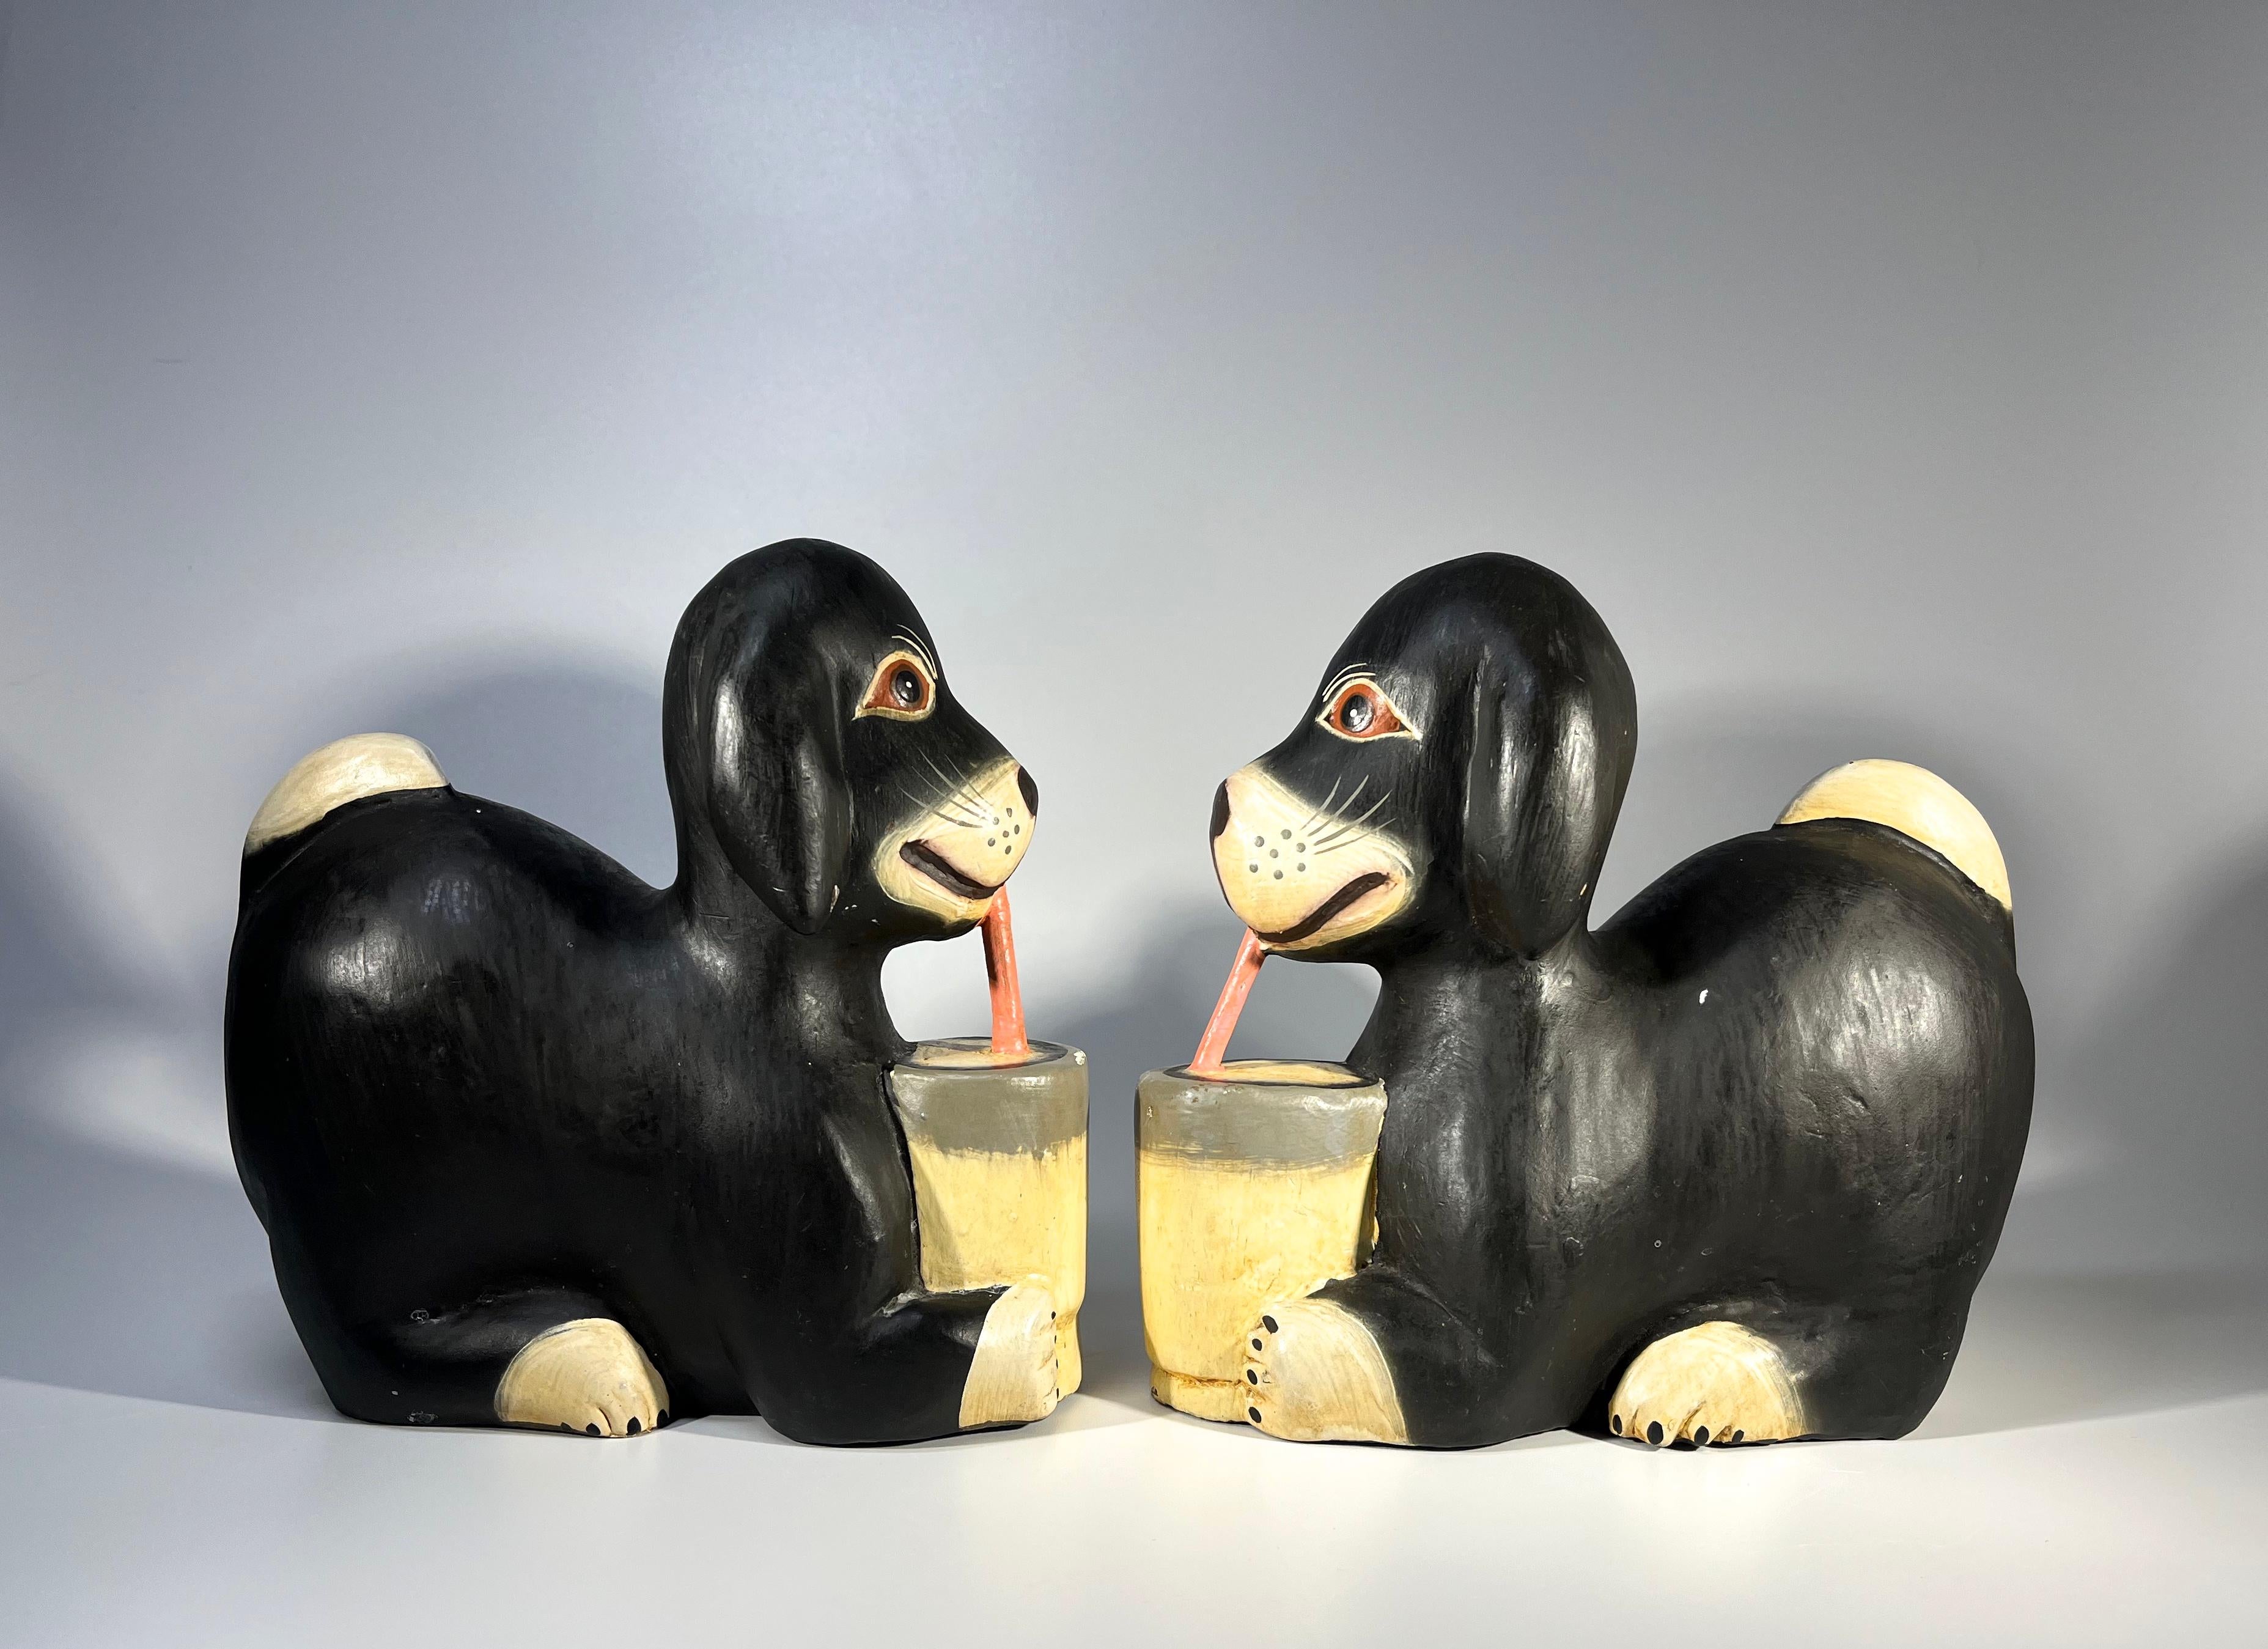 Unknown Peculiar Pair of Carved Wood Joyful Dogs Drinking Through Straws